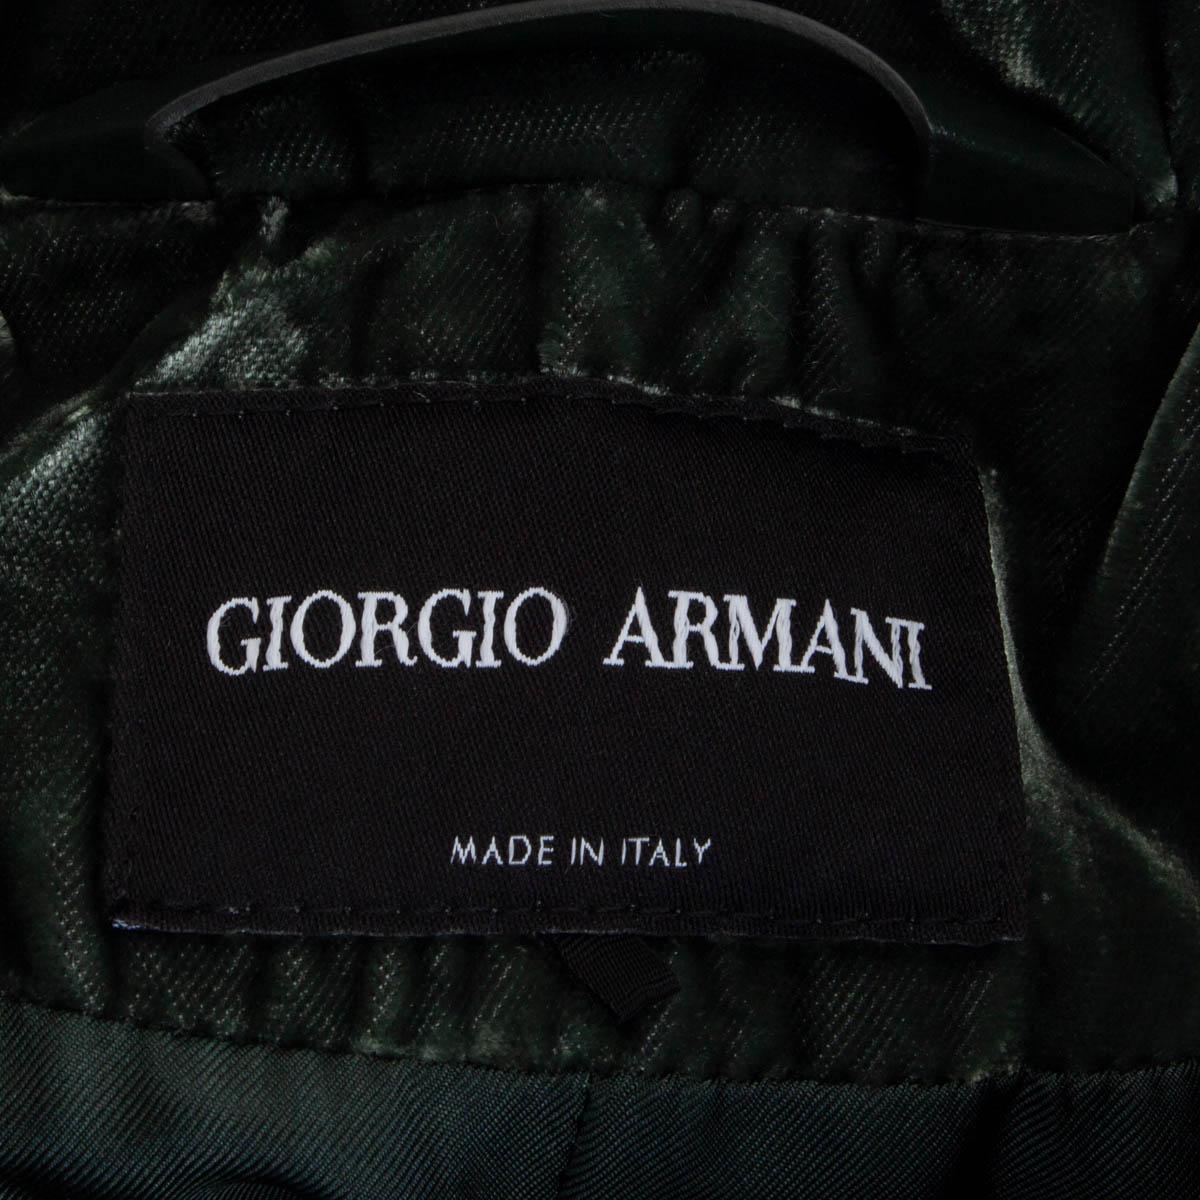 GIORGIO ARMANI dark green QUILTED VELVET Jacket 42 M + SCARF For Sale 1